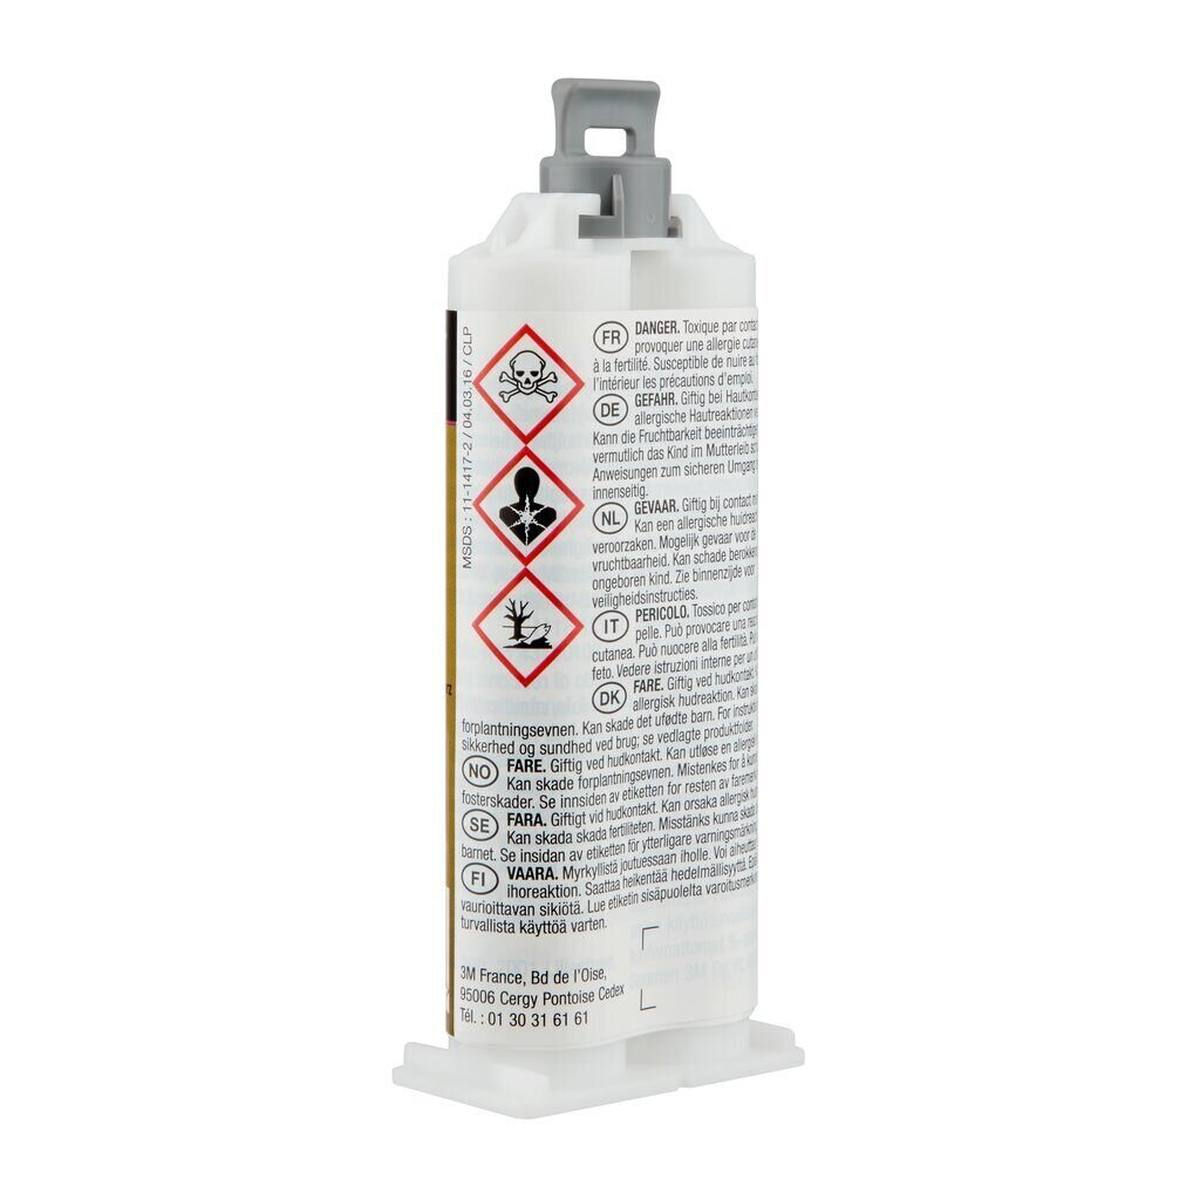 3M Scotch-Weld 2-component construction adhesive based on epoxy resin for the EPX System DP 270, black, 48.5 ml